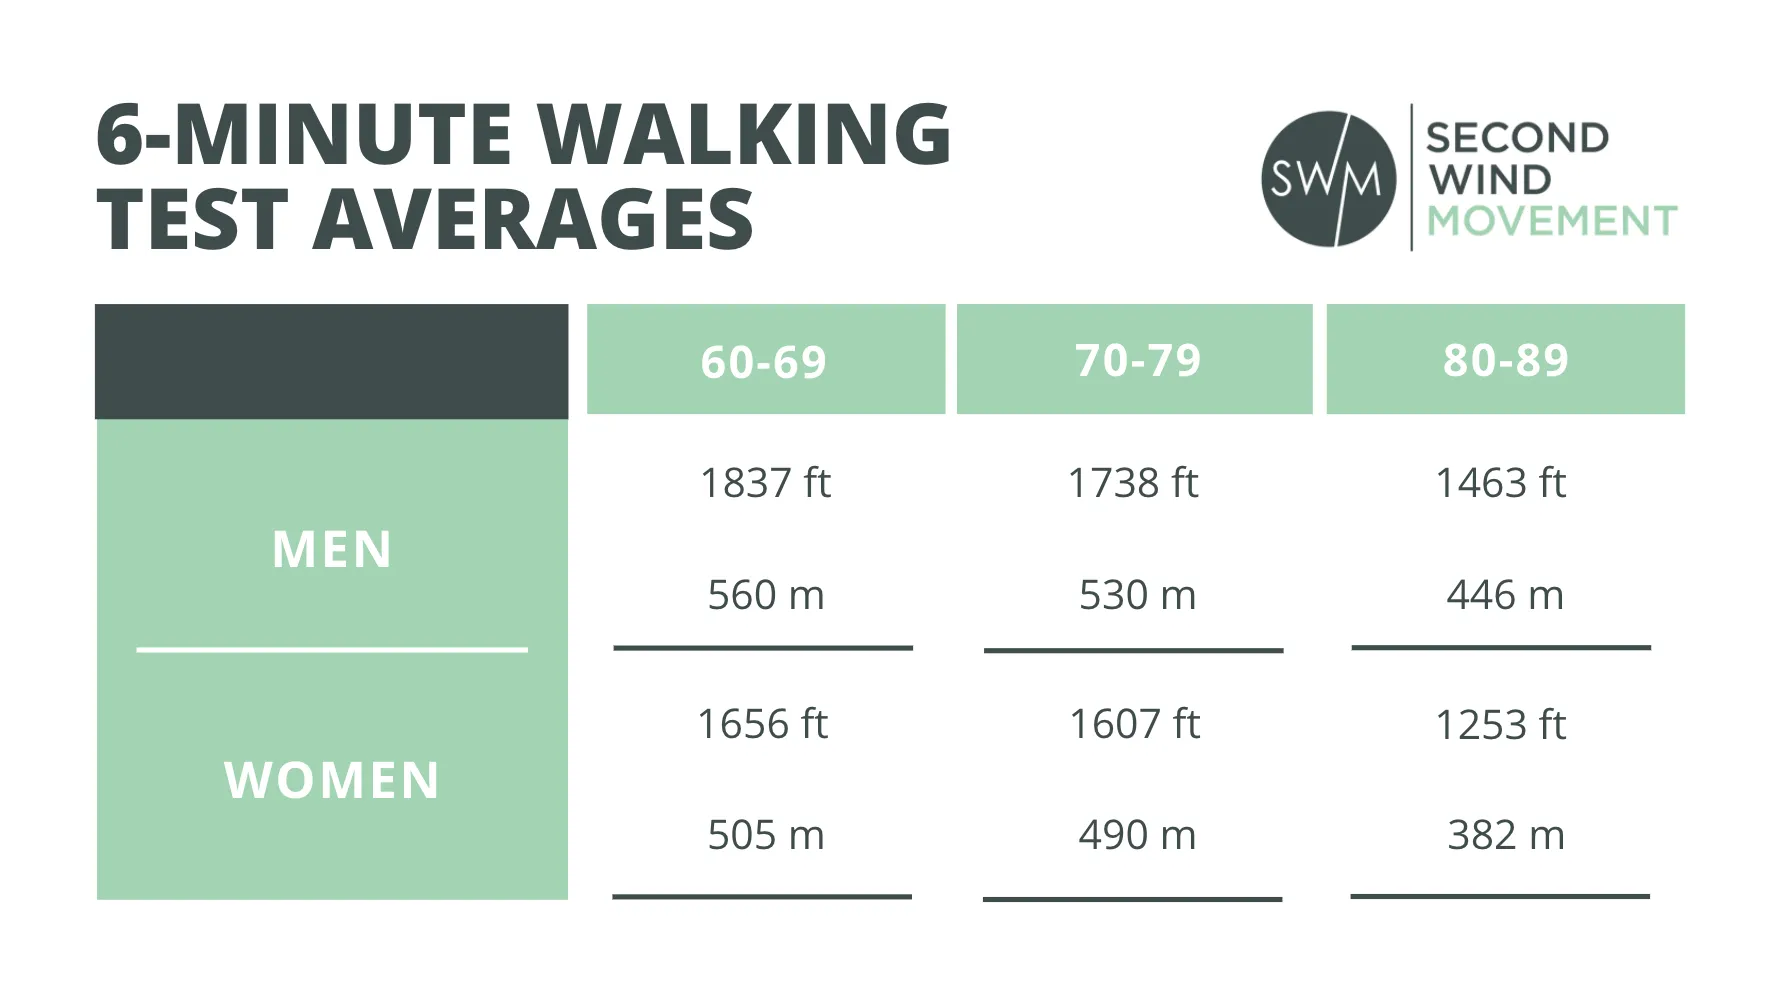 6-minute walking fitness test averages for 60s, 70s & 80s